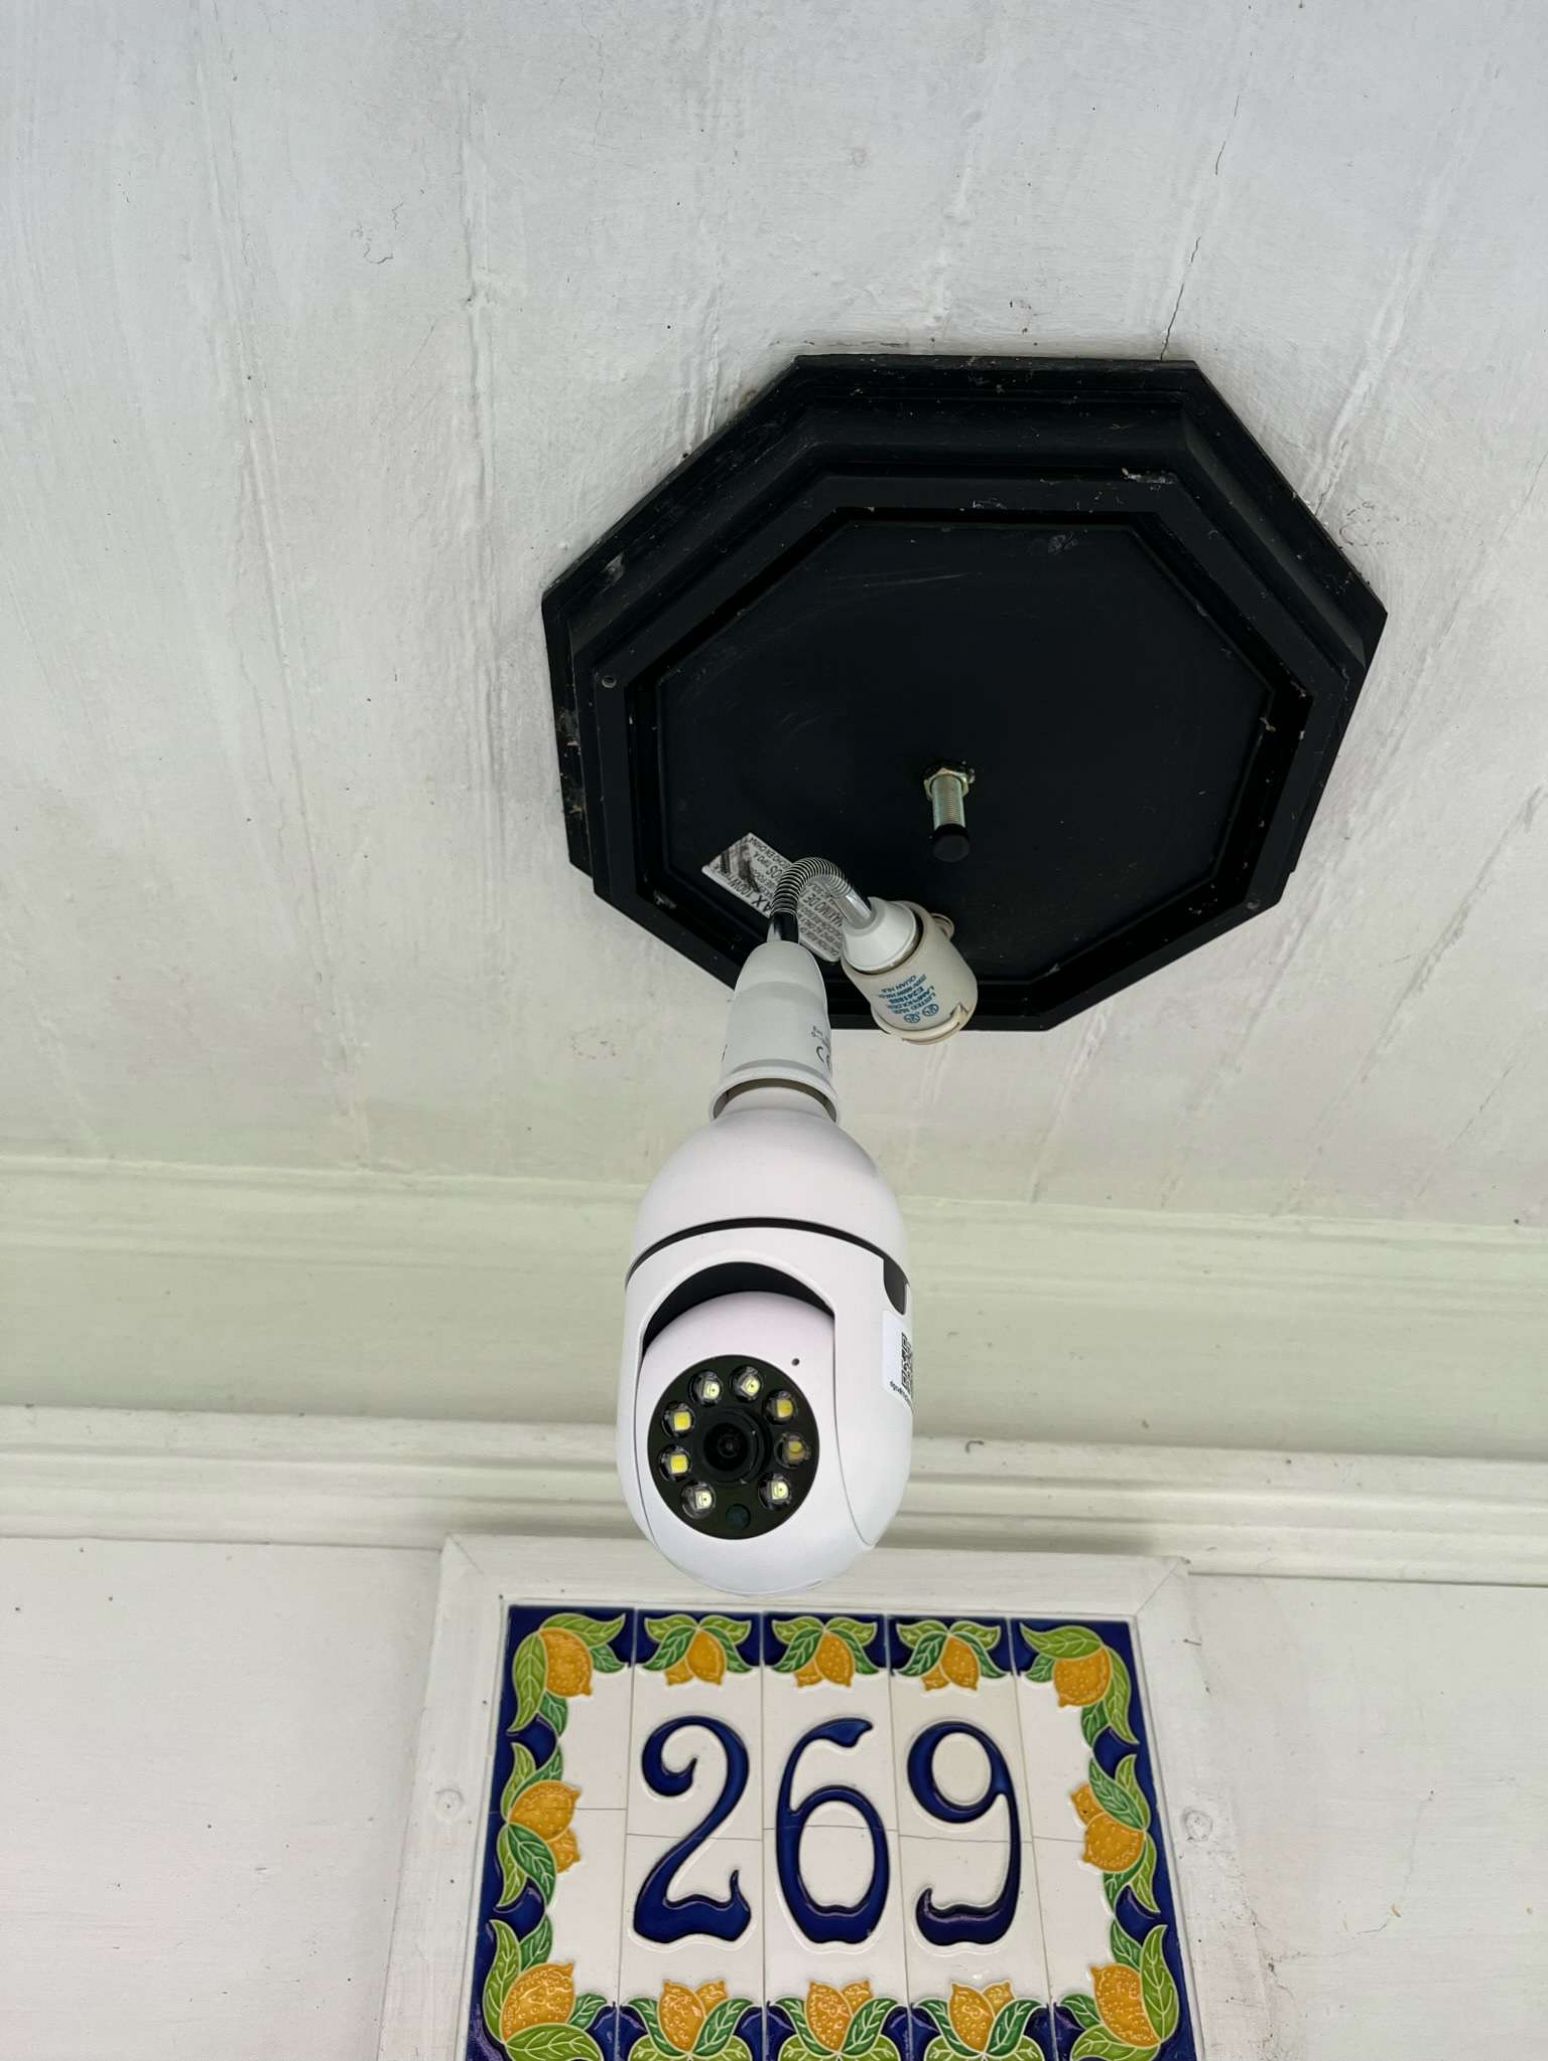 Reviews Of Nomad Security Camera